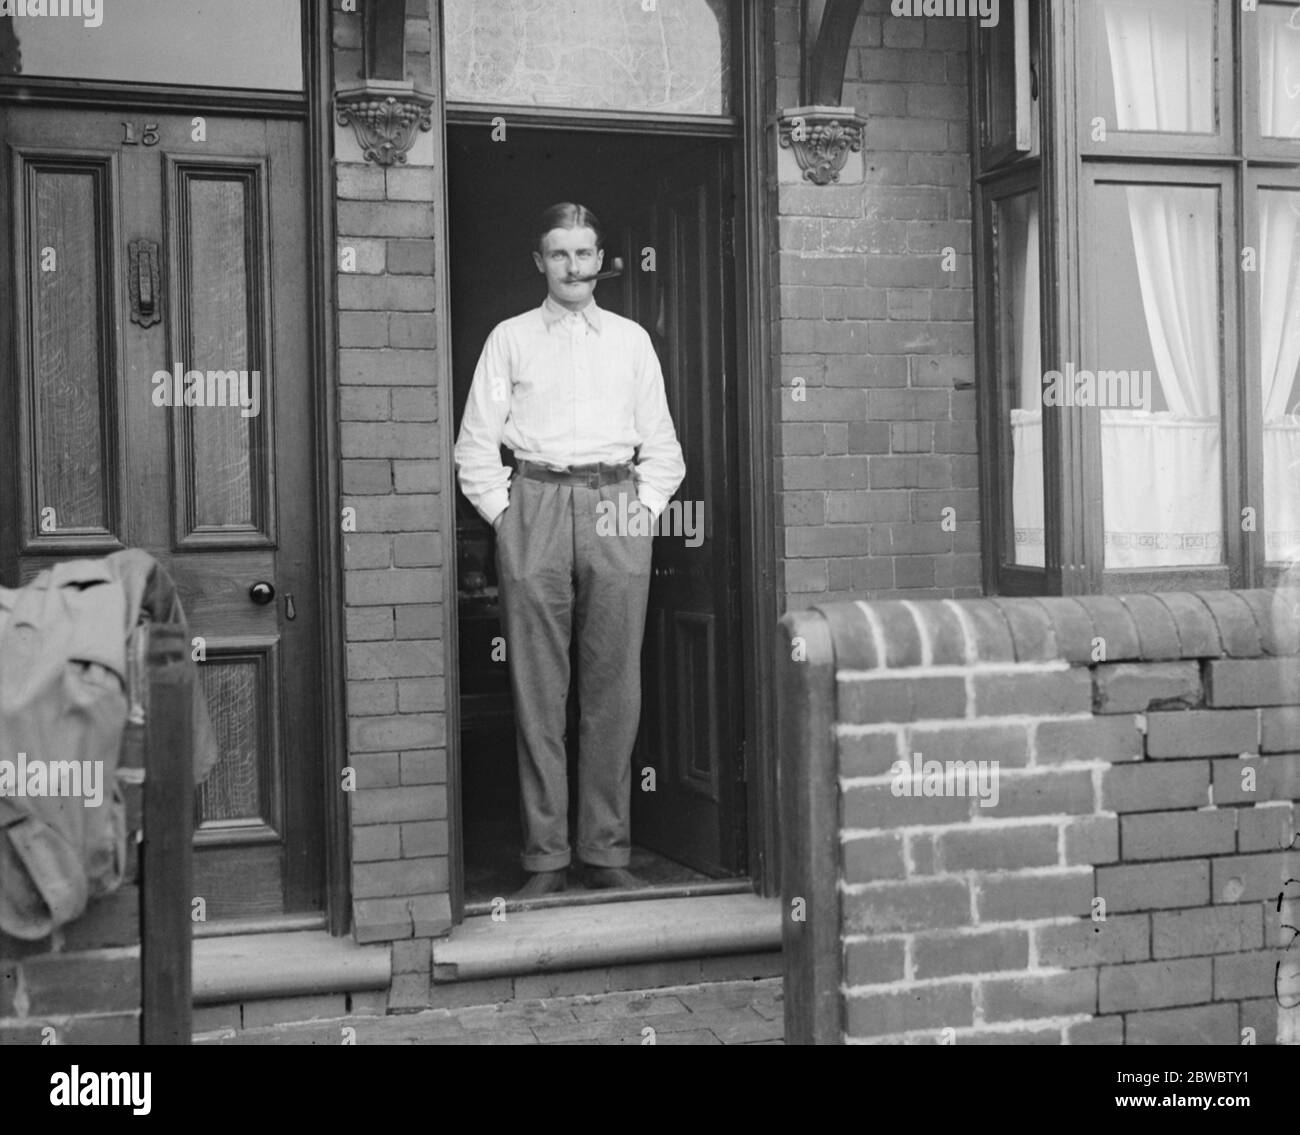 Tory leader 's son as Labour candidate . Mr Oliver Baldwin , son of the Conservative Leader , is putting up as a Labour Candidate for Dudley . Mr O Baldwin in the doorway of the house where he is staying at Dudley . 15 September 1924 Stock Photo